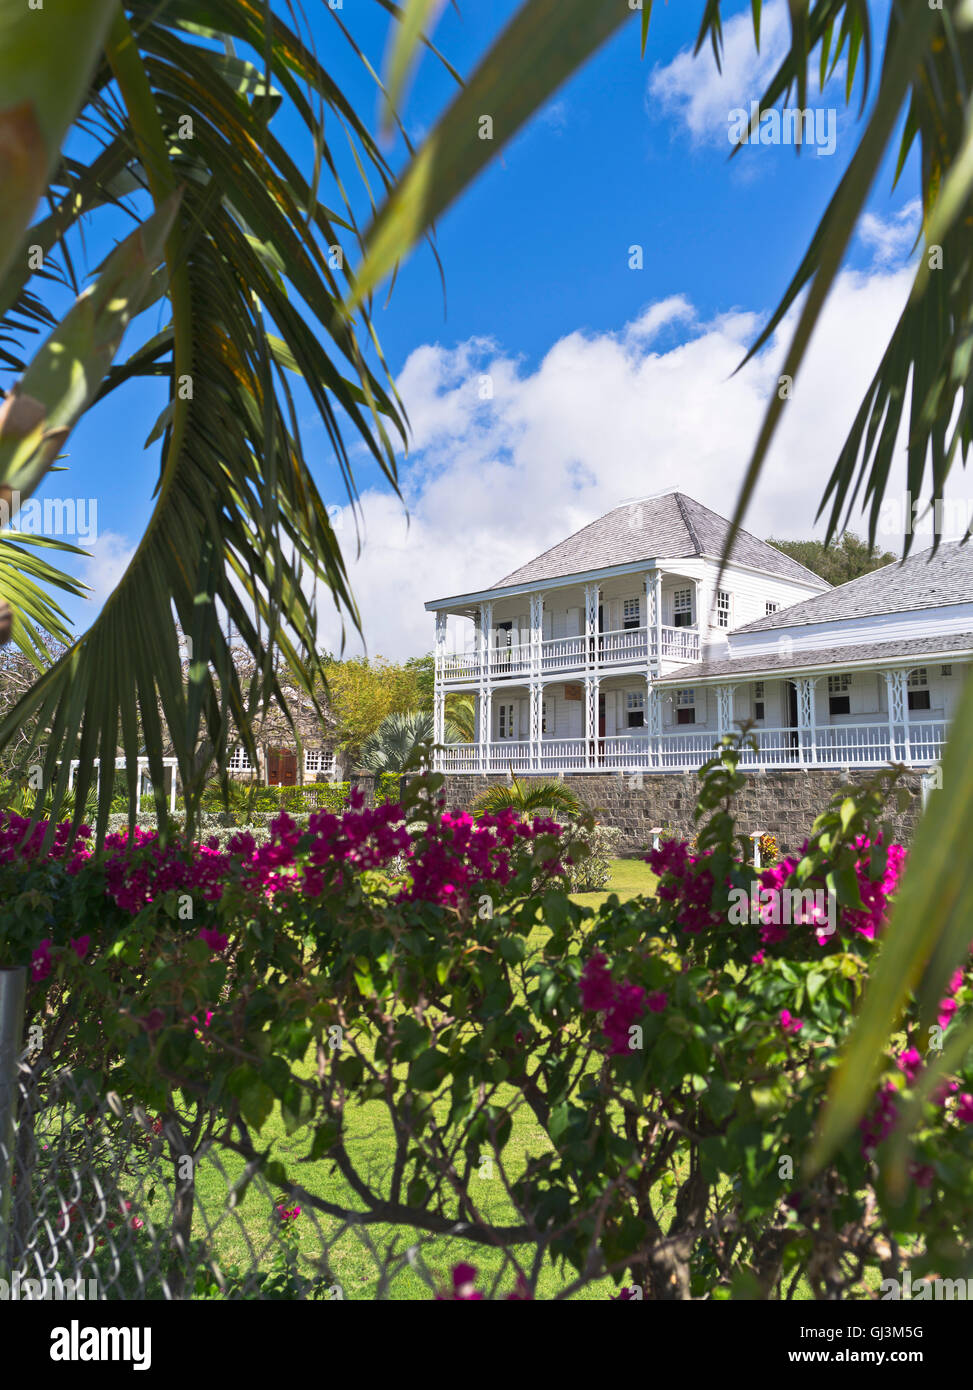 dh Fairview Great House ST KITTS CARIBBEAN Old colonial house gardens museum Nelsons garden Stock Photo